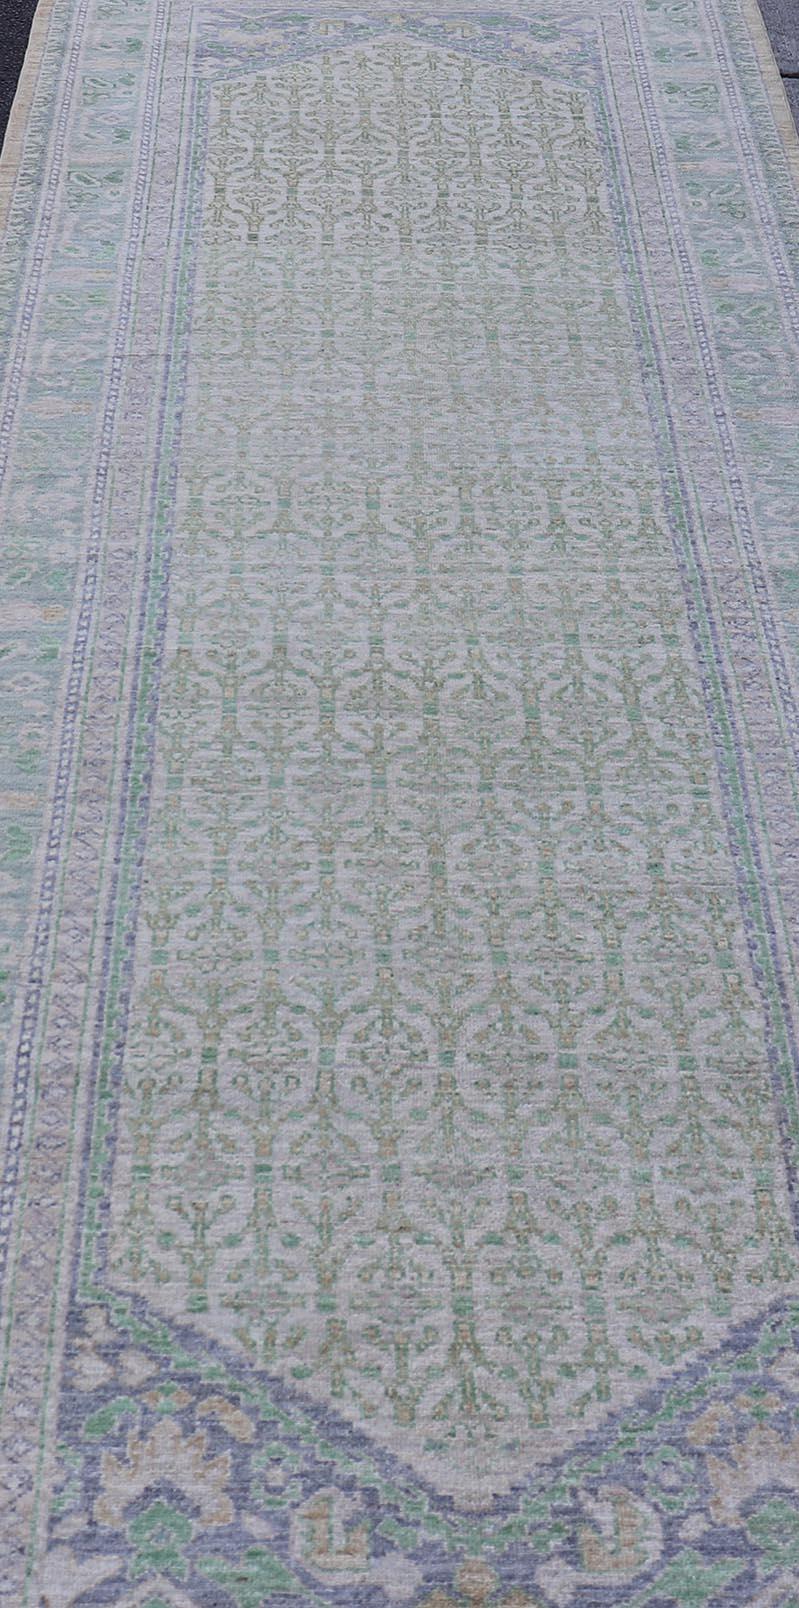 Sub-Geometric Paisley Designed Rug with Muted Tones of Yellow-Green and Brown For Sale 3